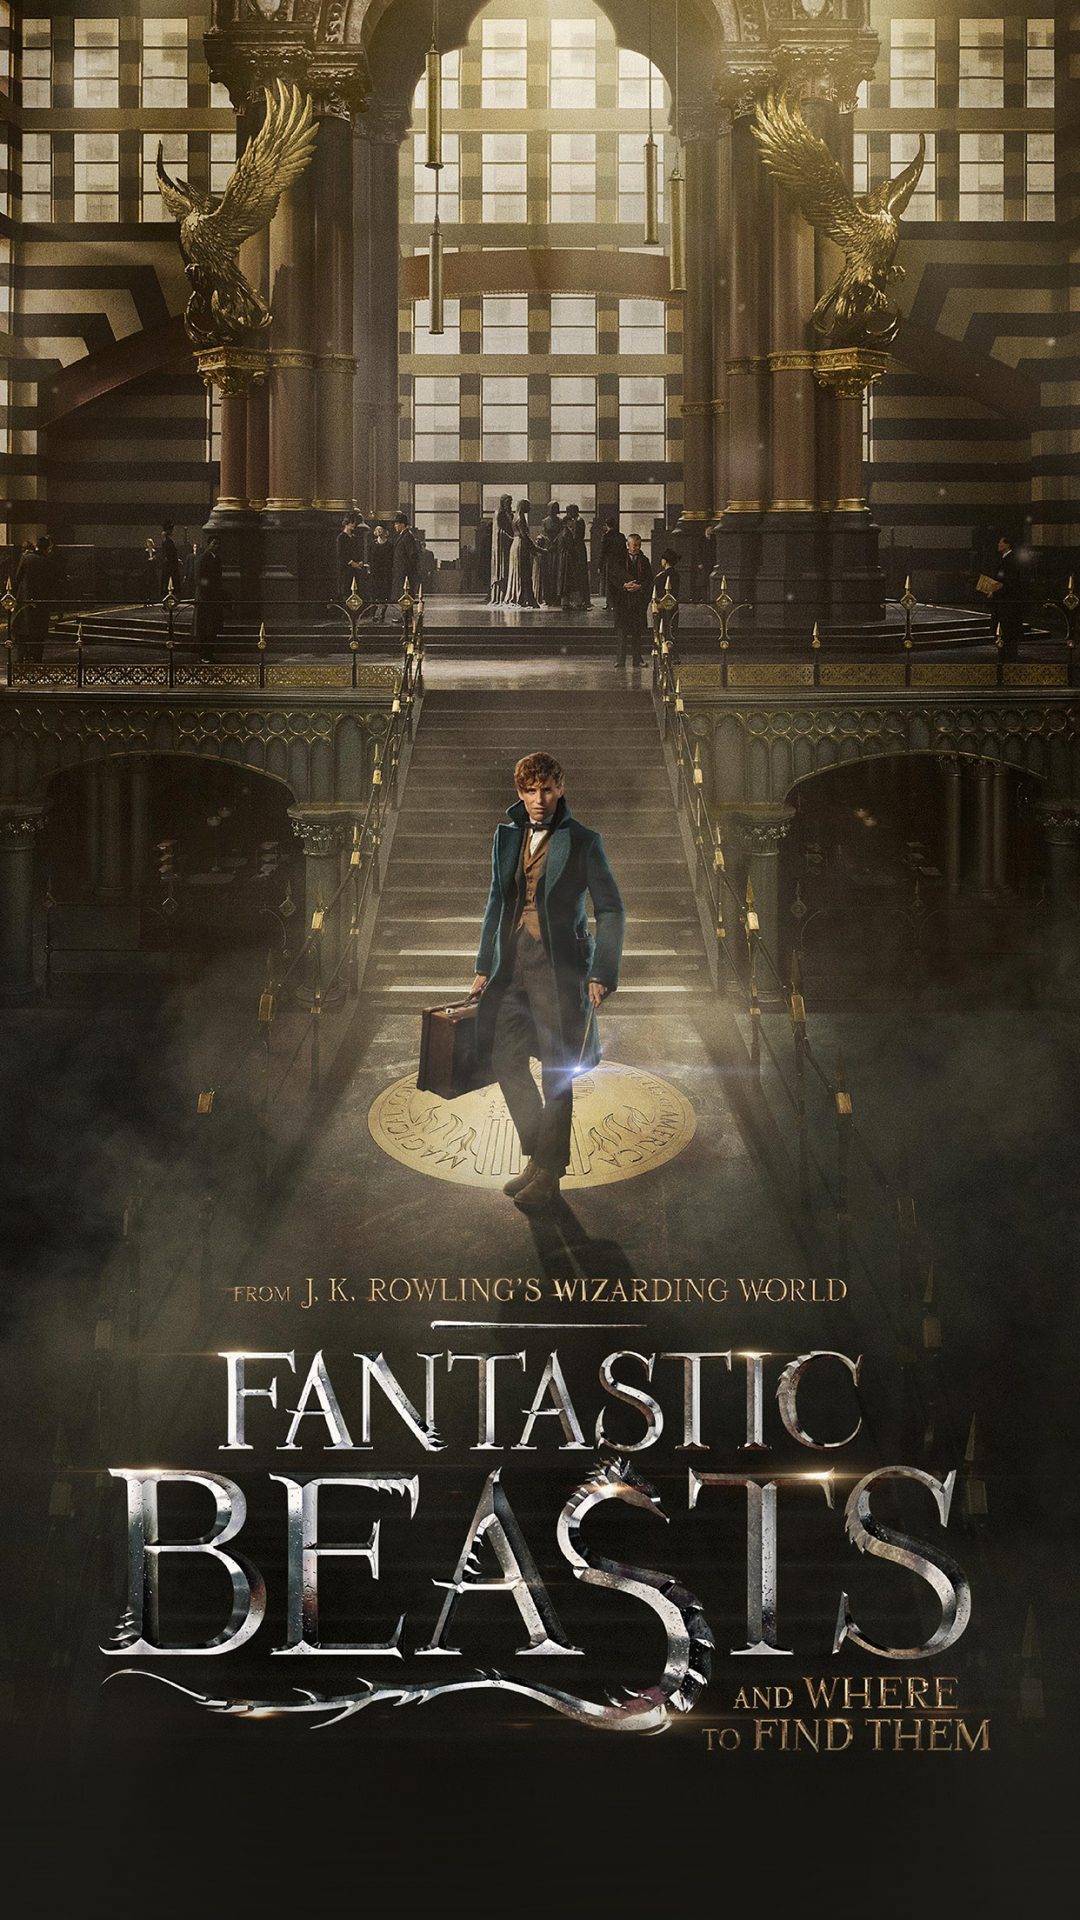 Fantastic Beasts And Where To Find Them Film Illustration Art Poster